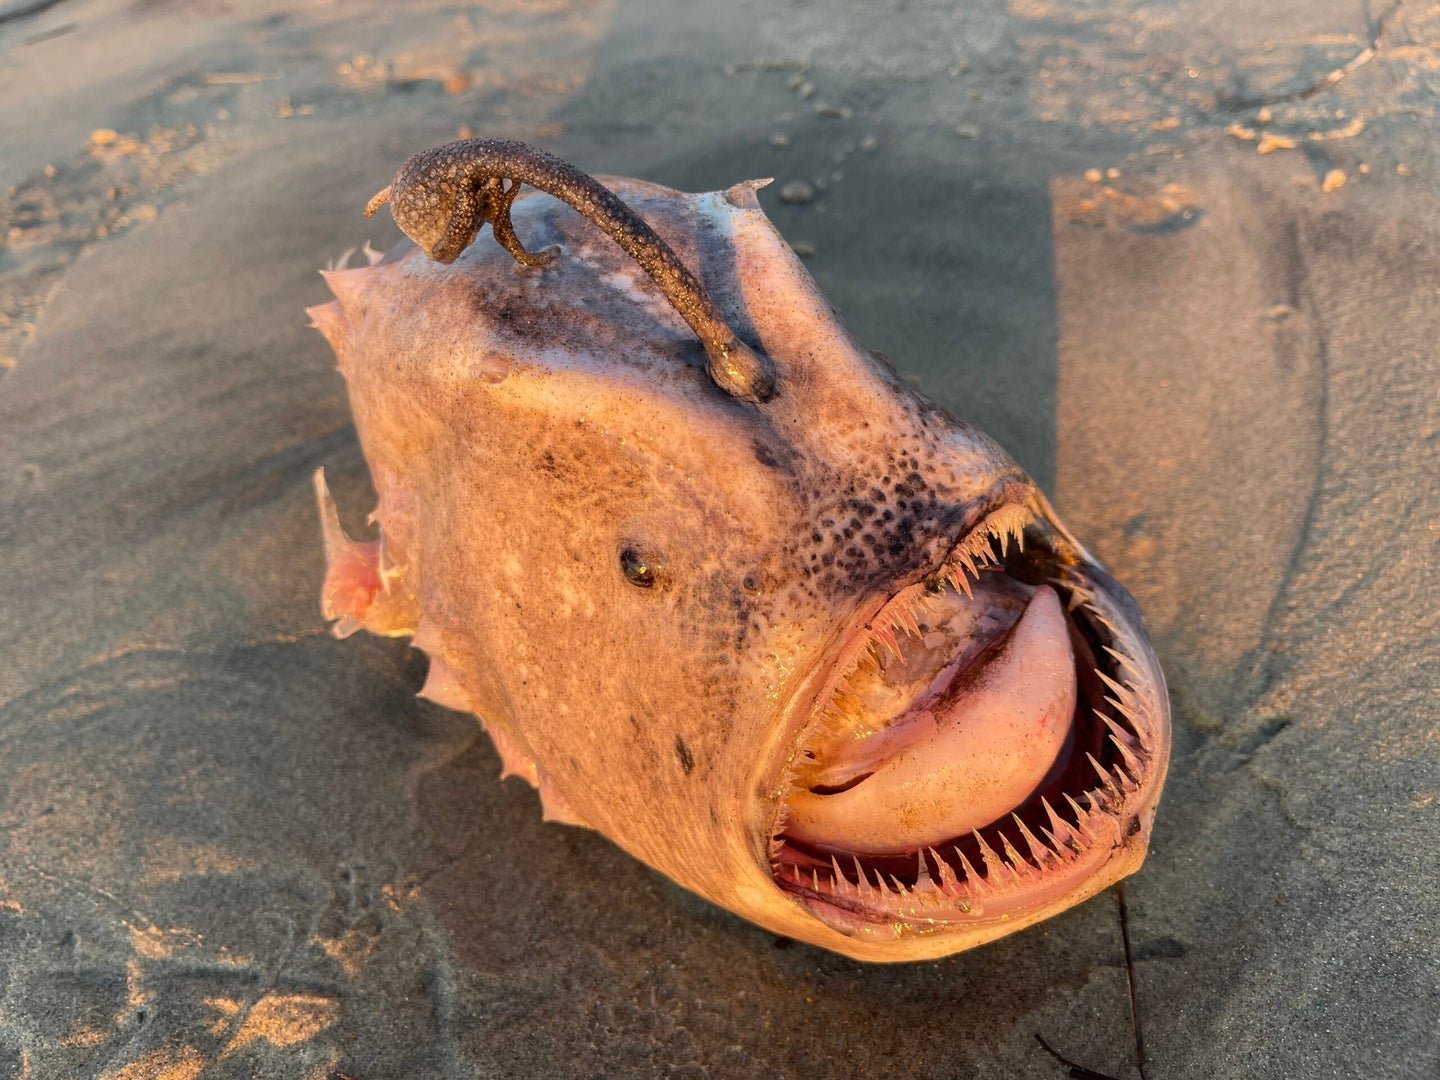 Extremely rare nightmare fish found on San Diego beach 